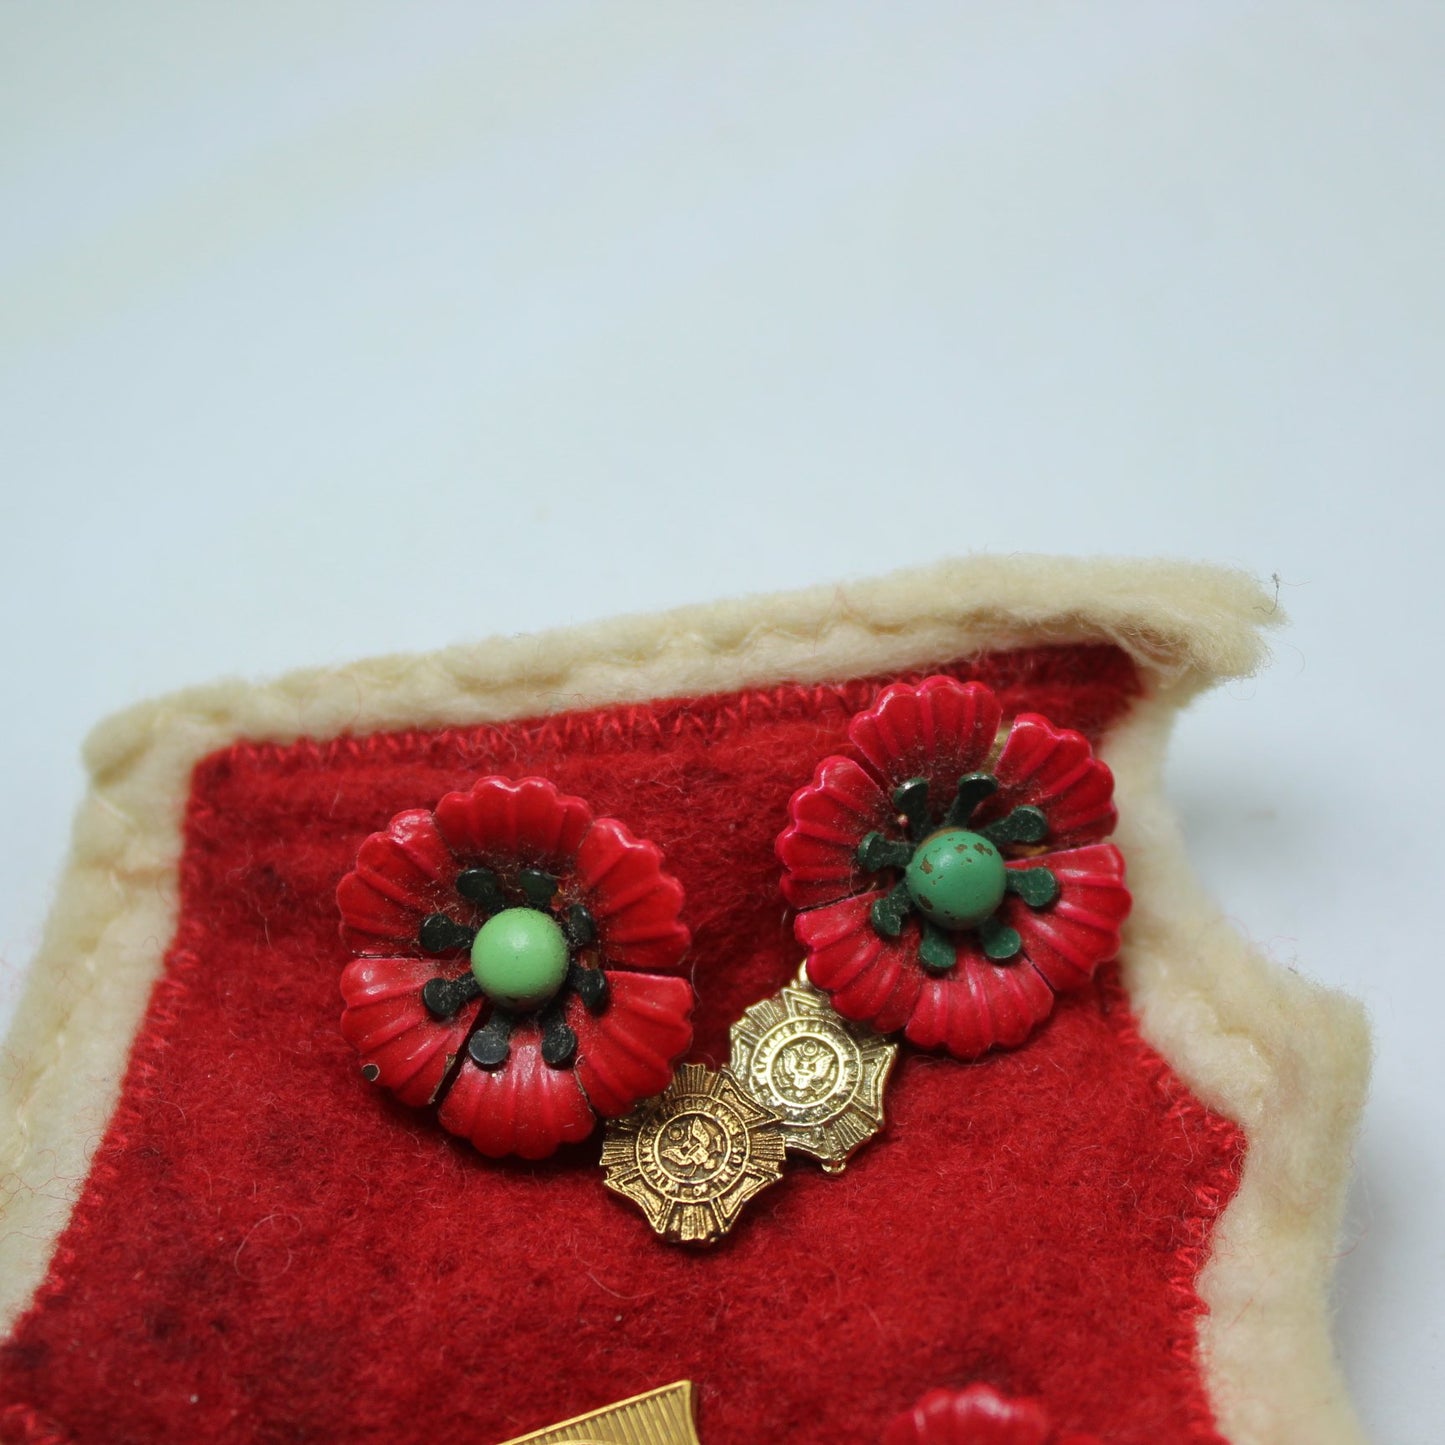 Collection Vtg Military Order Cootie Aux and VFW Poppies Medals Red Felt Patch Cootie Pin closeup poppies